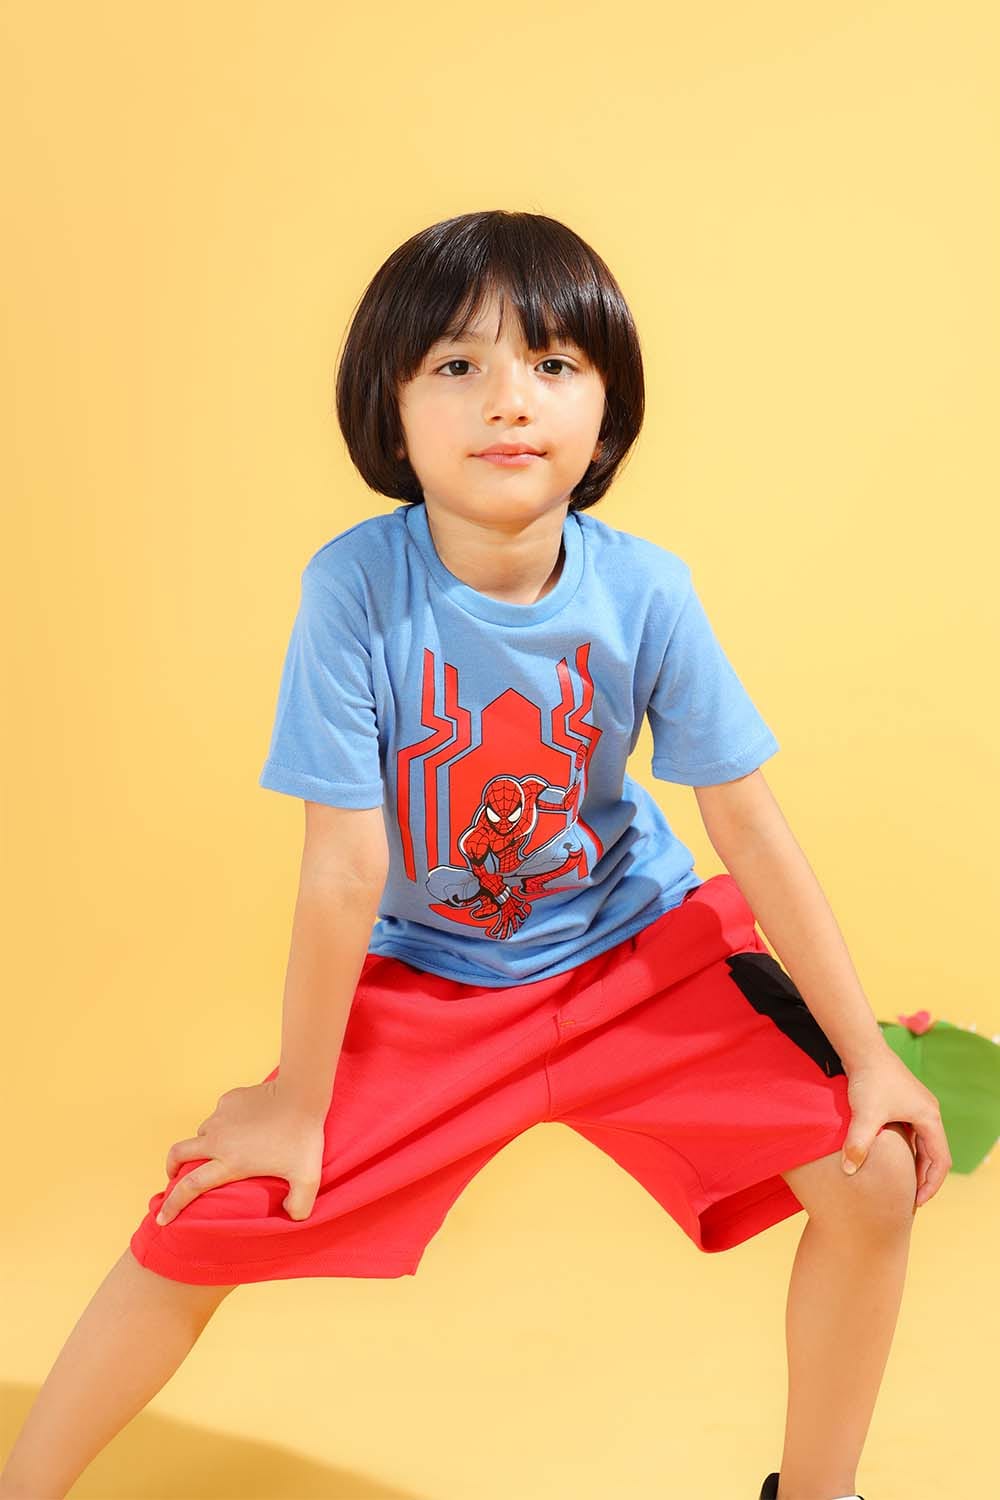 Hope Not Out by Shahid Afridi Boys Knit T-Shirt Sky Blue Half Sleeves T-Shirt with Spider Man Graphic for Boys